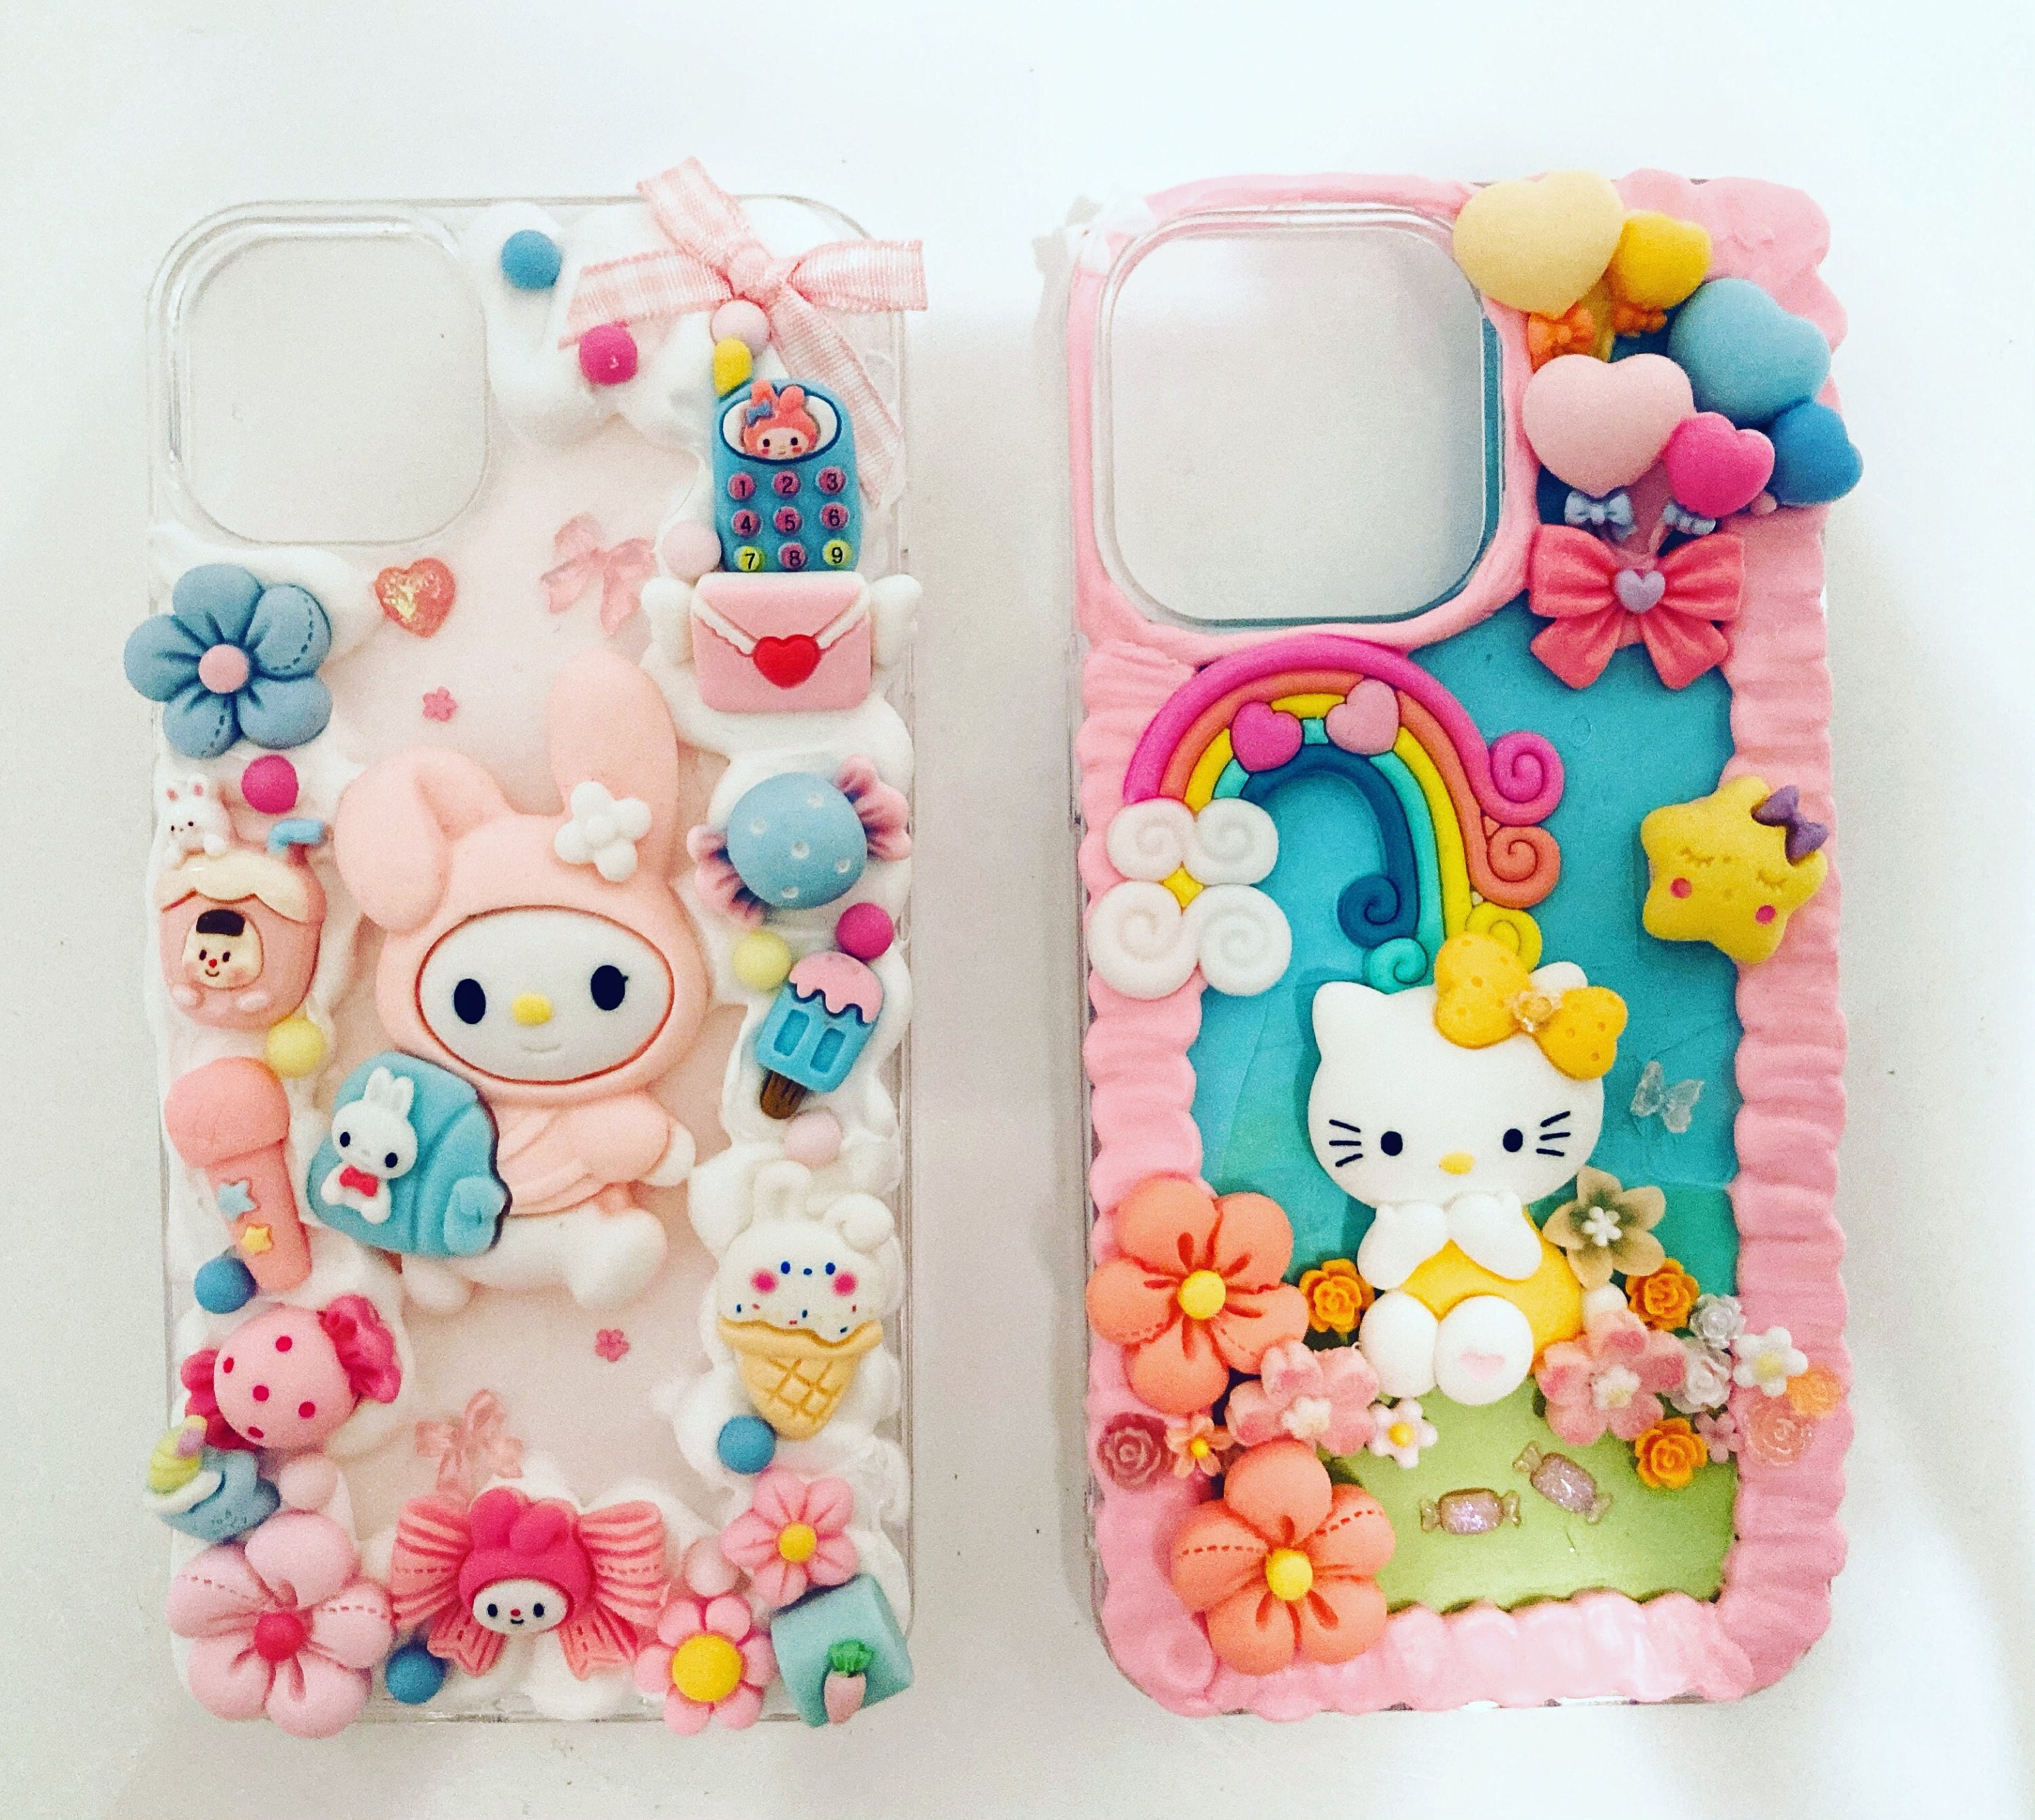 Whipped cream and lilac syrup decoden  Girly phone cases, Diy phone case,  Decoden phone case